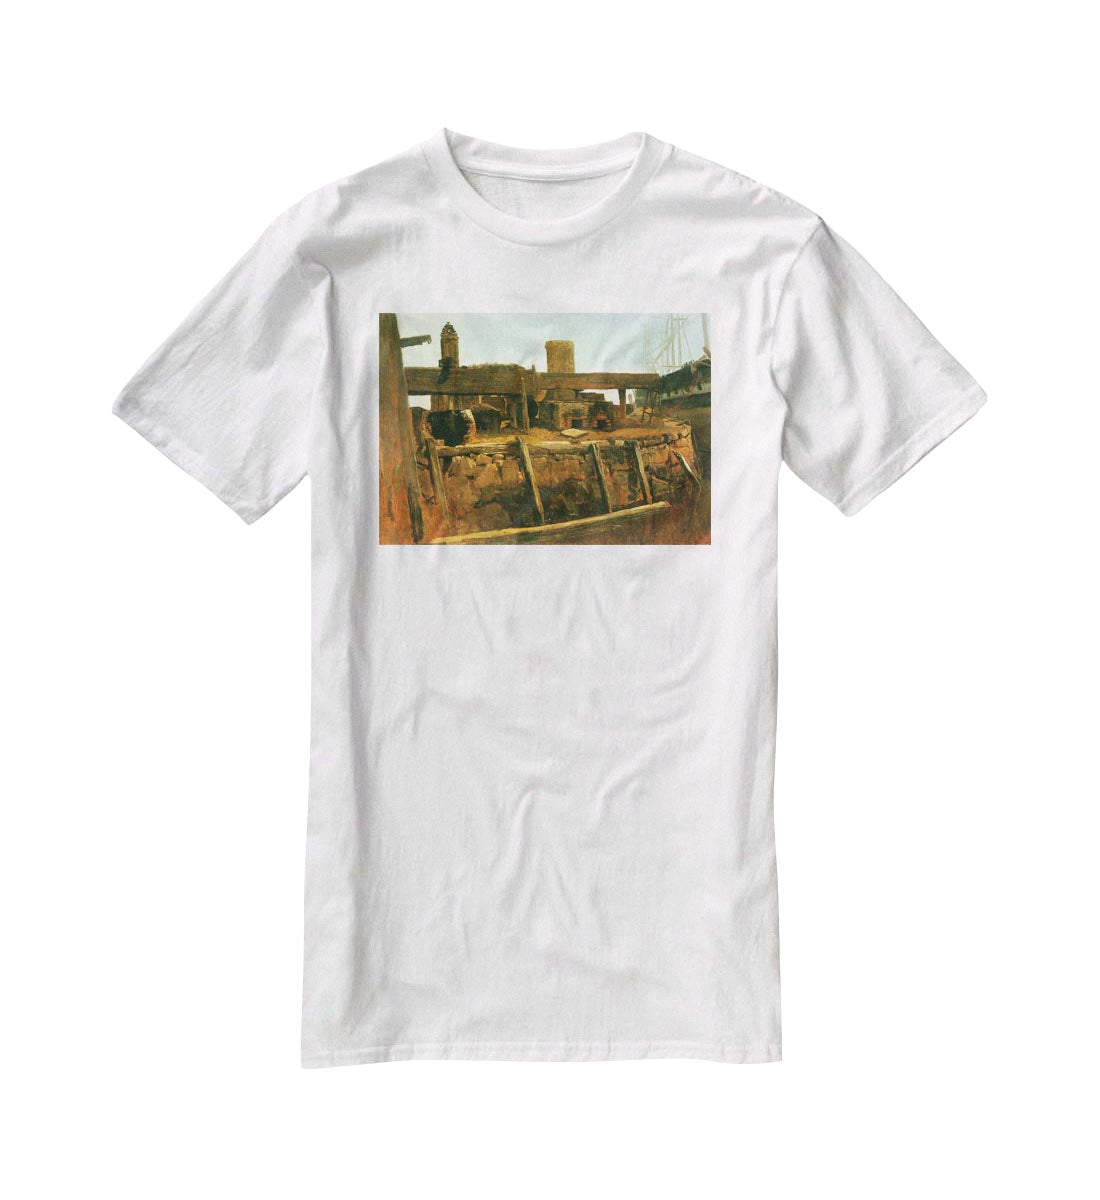 Boat at the dock by Bierstadt T-Shirt - Canvas Art Rocks - 5